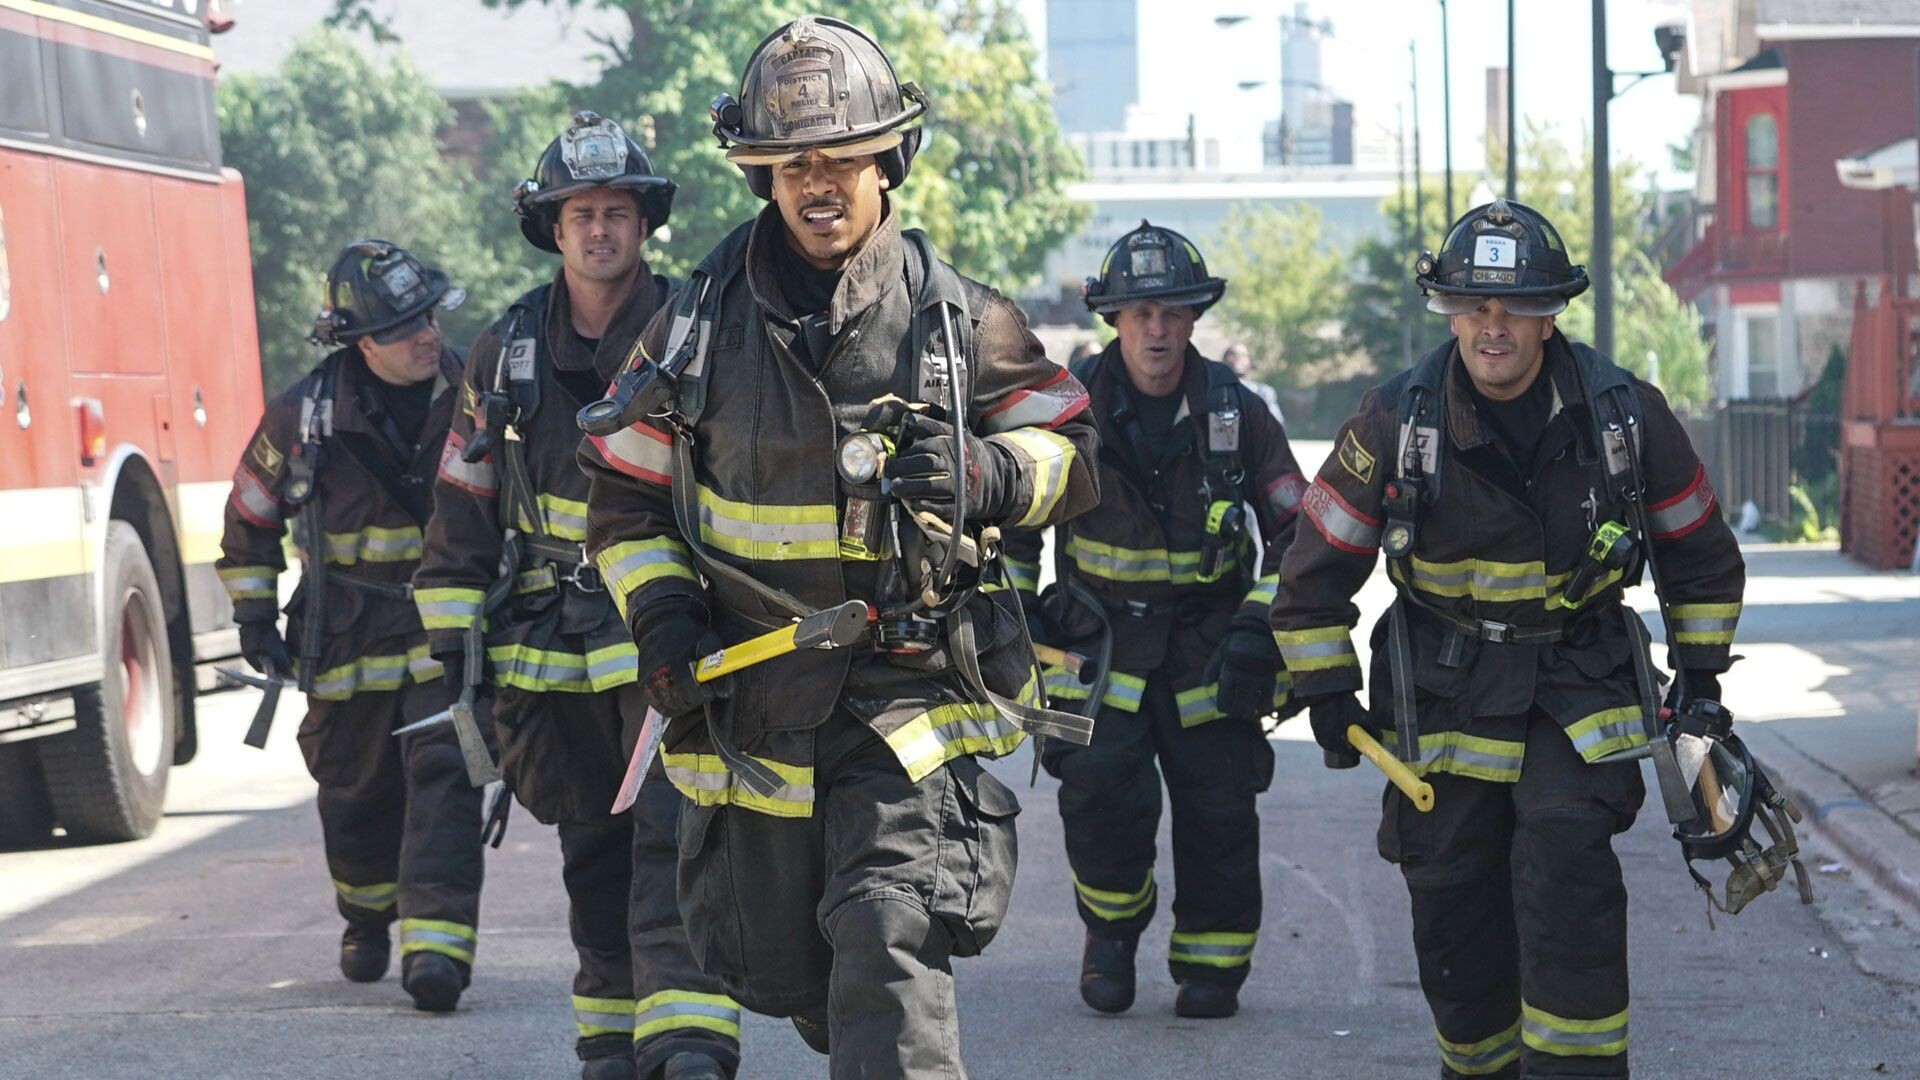 Chicago Fire (TV Series): Tense drama series, Professional and personal lives of firefighters, Working under difficult conditions. 1920x1080 Full HD Wallpaper.